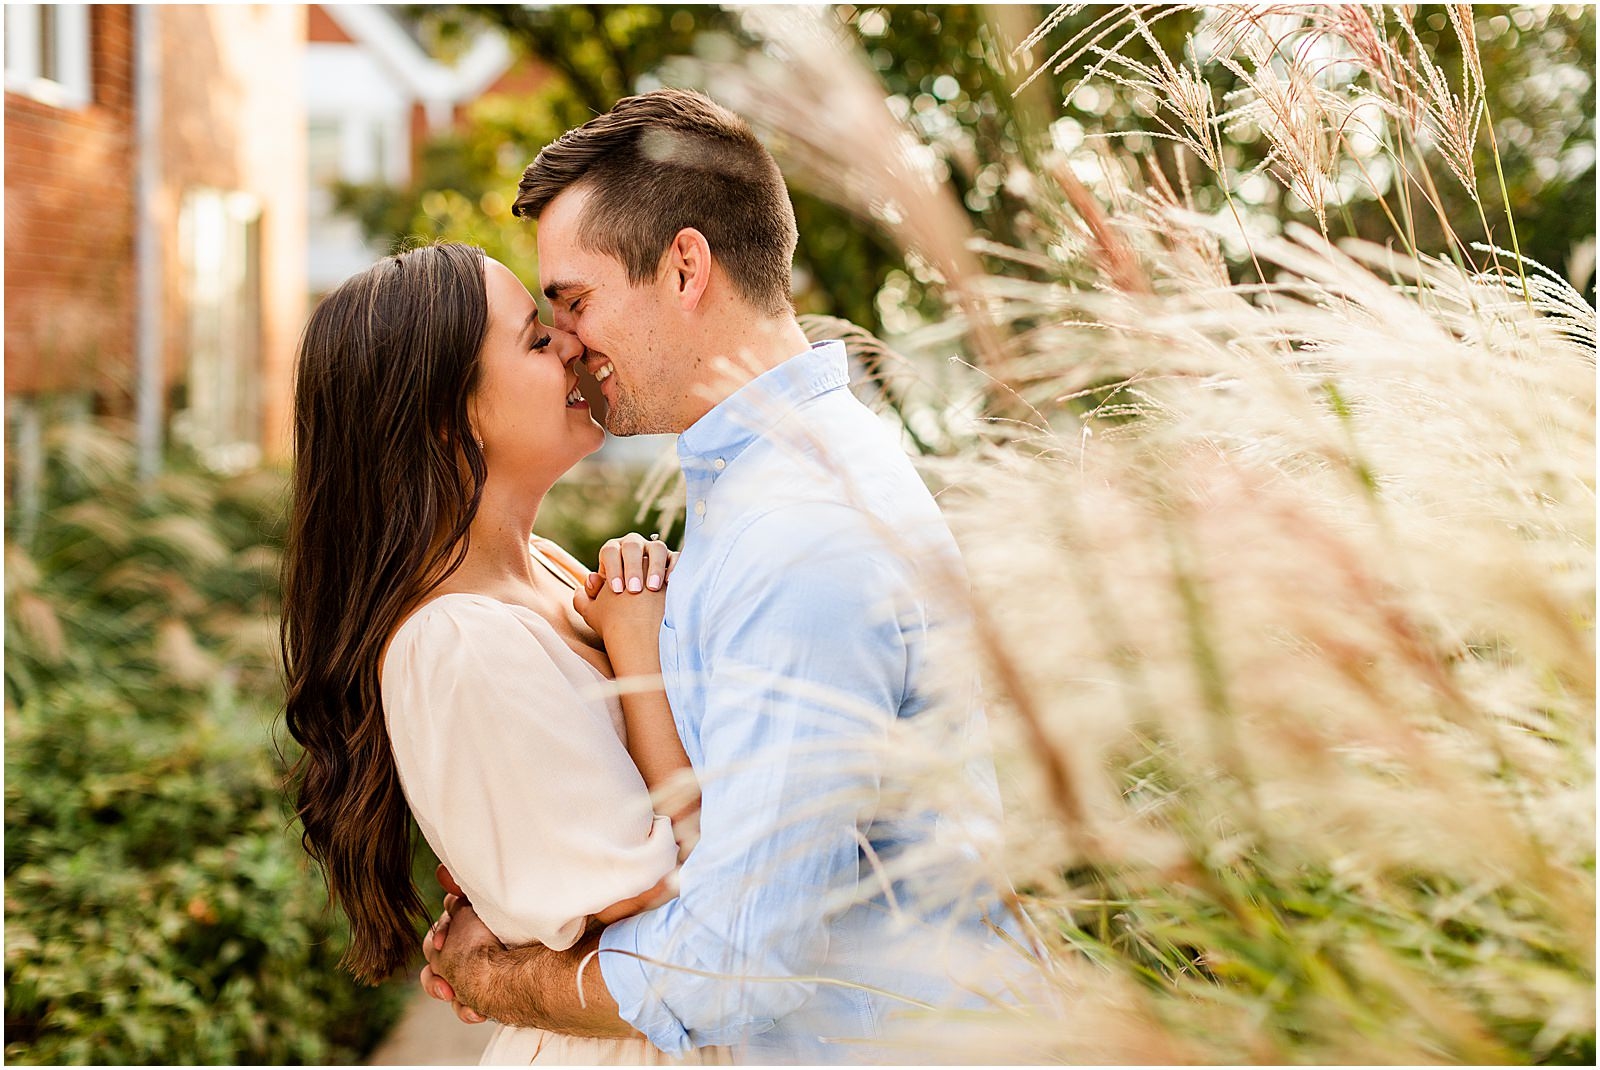 Emma and Jace's Downtown Newburgh Engagement Session | Bret and Brandie Photography | Evansville Indiana Wedding Photographers_0029.jpg